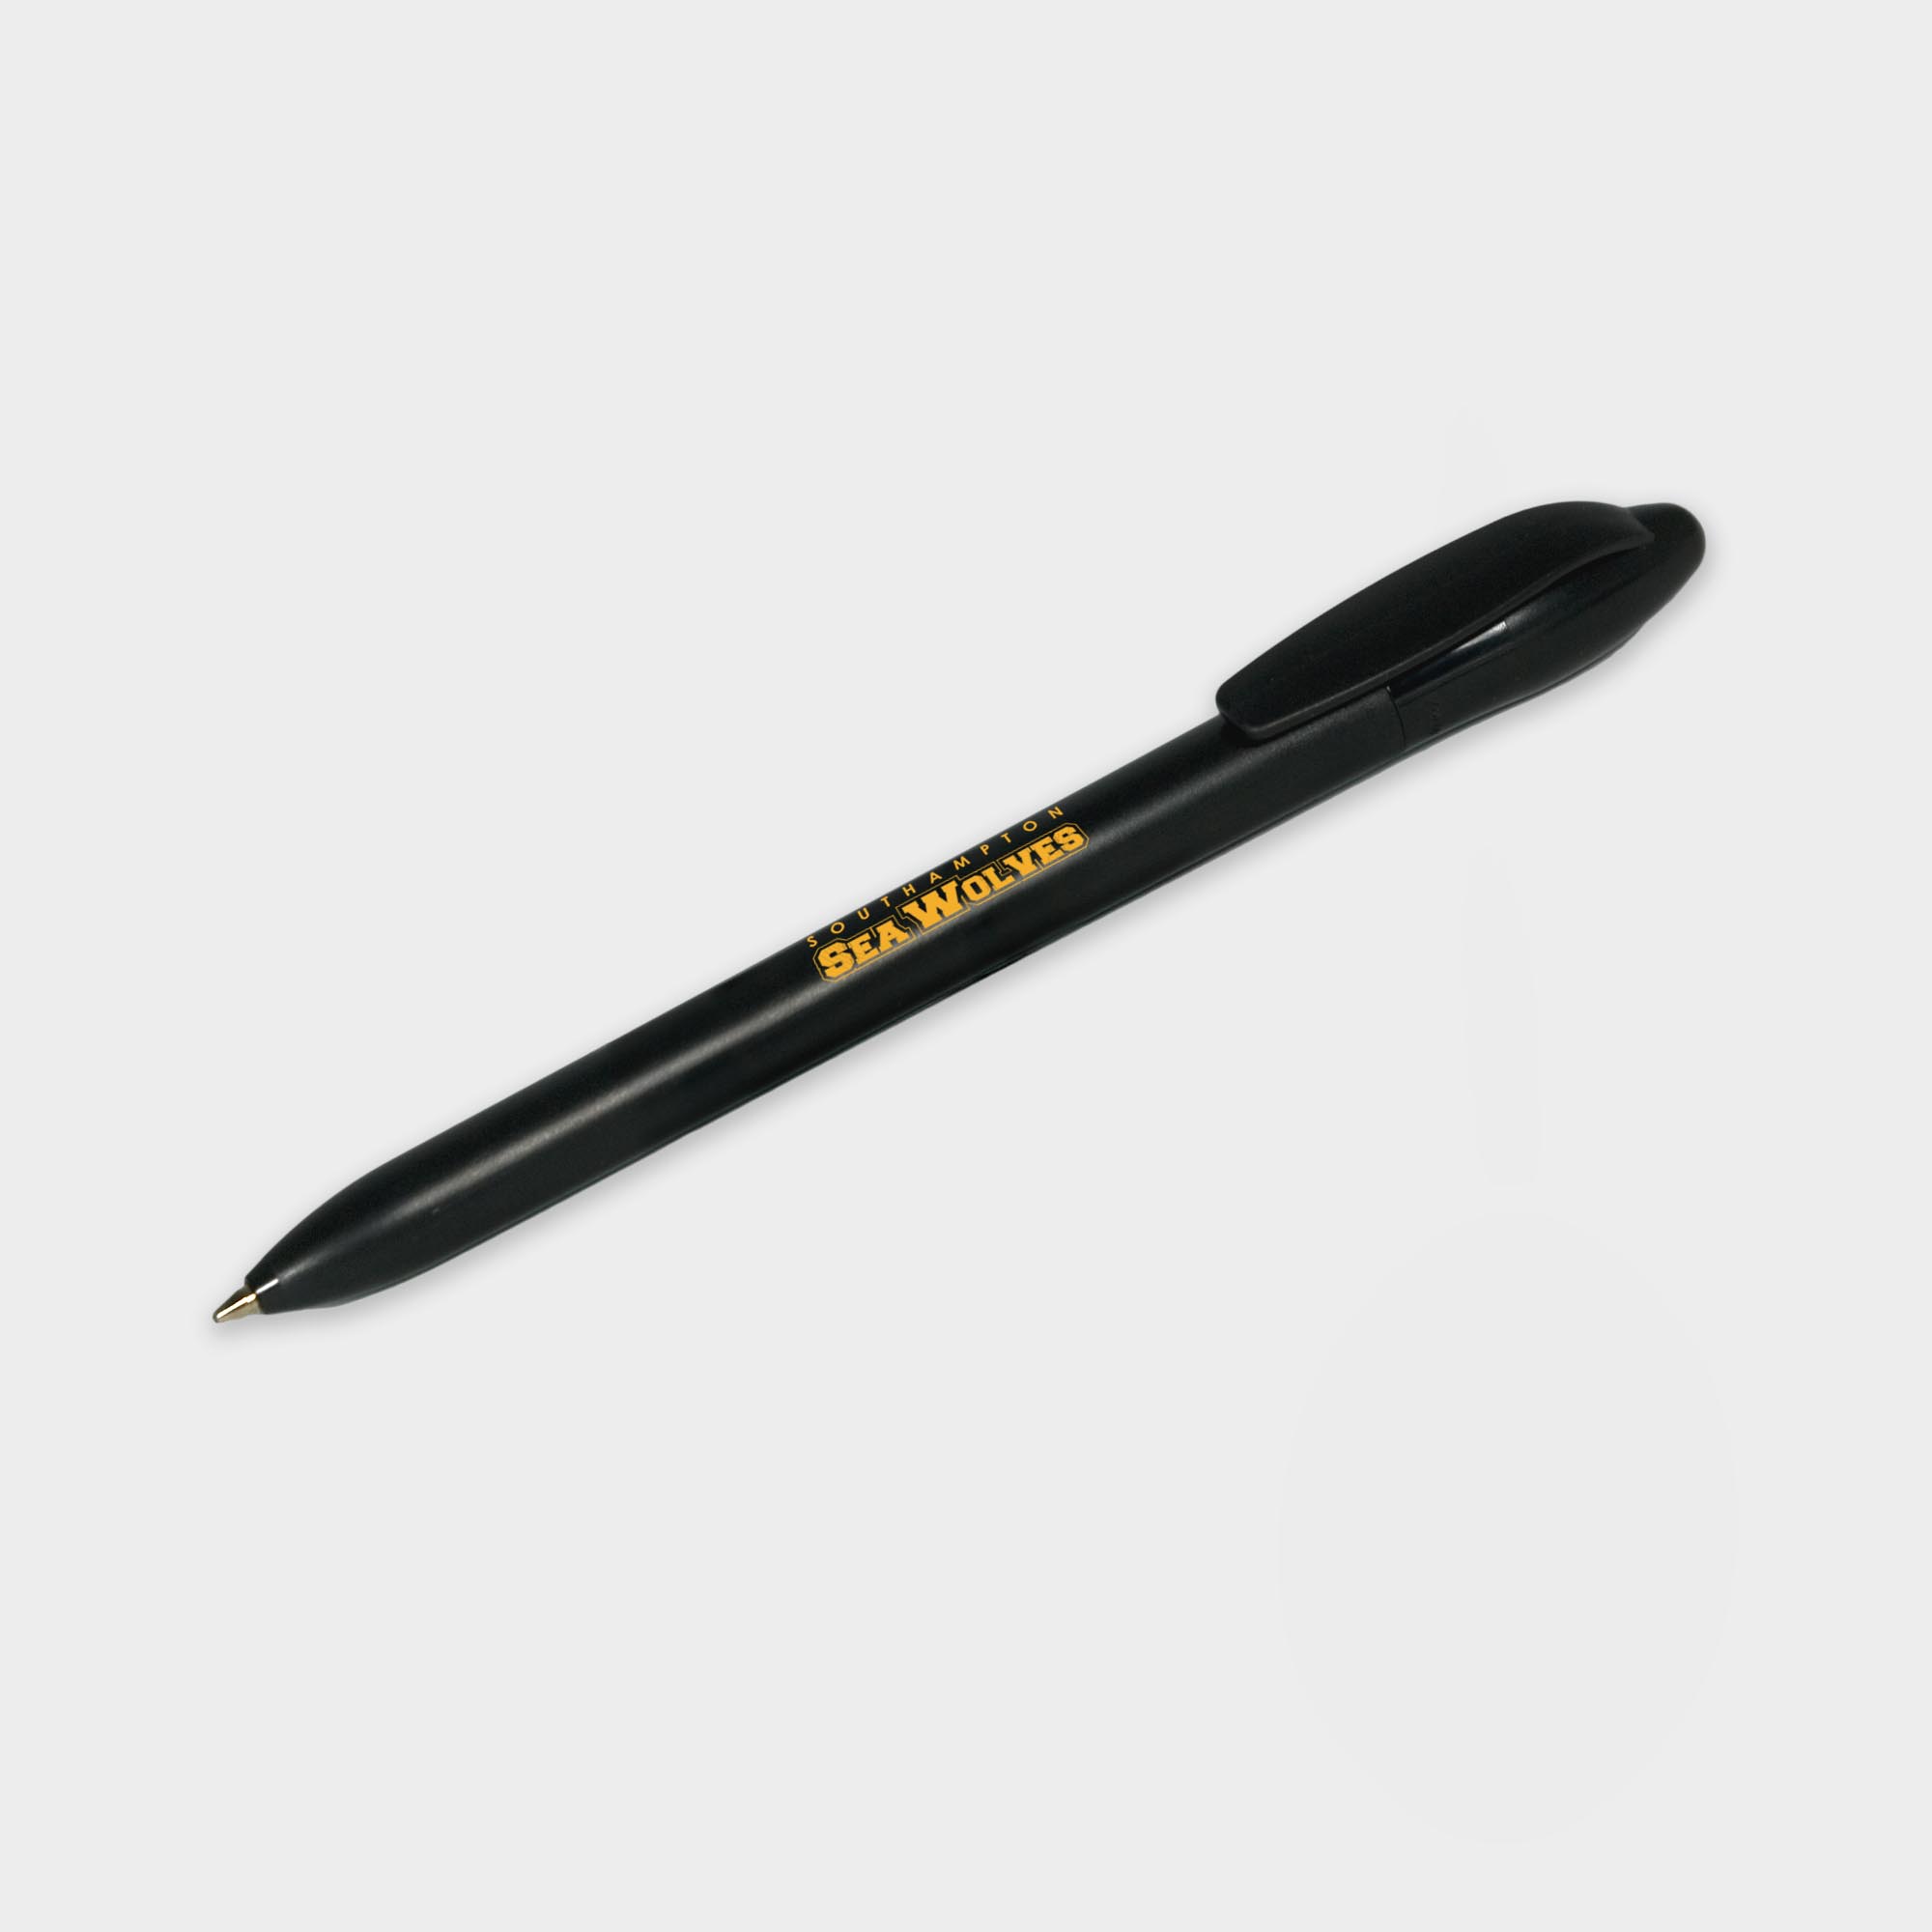 The Green & Good Yukon Pen made from recycled plastic. Twist action budget pen available in black or white. Black ink as standard. Black